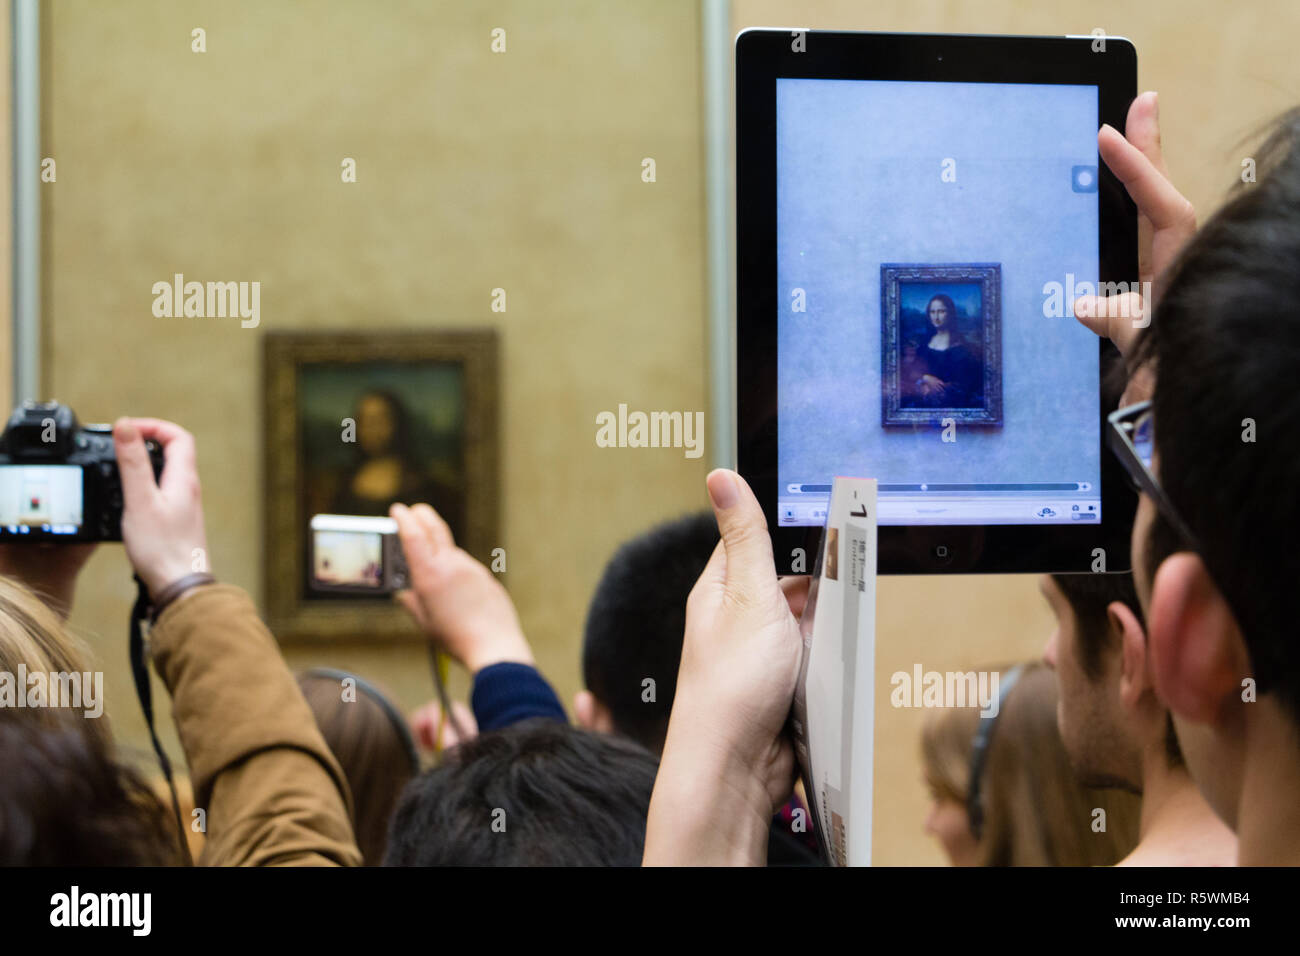 People taking pictures of the Mona Lisa portrait with their phones and ipads in the Louvre in Paris, France Stock Photo